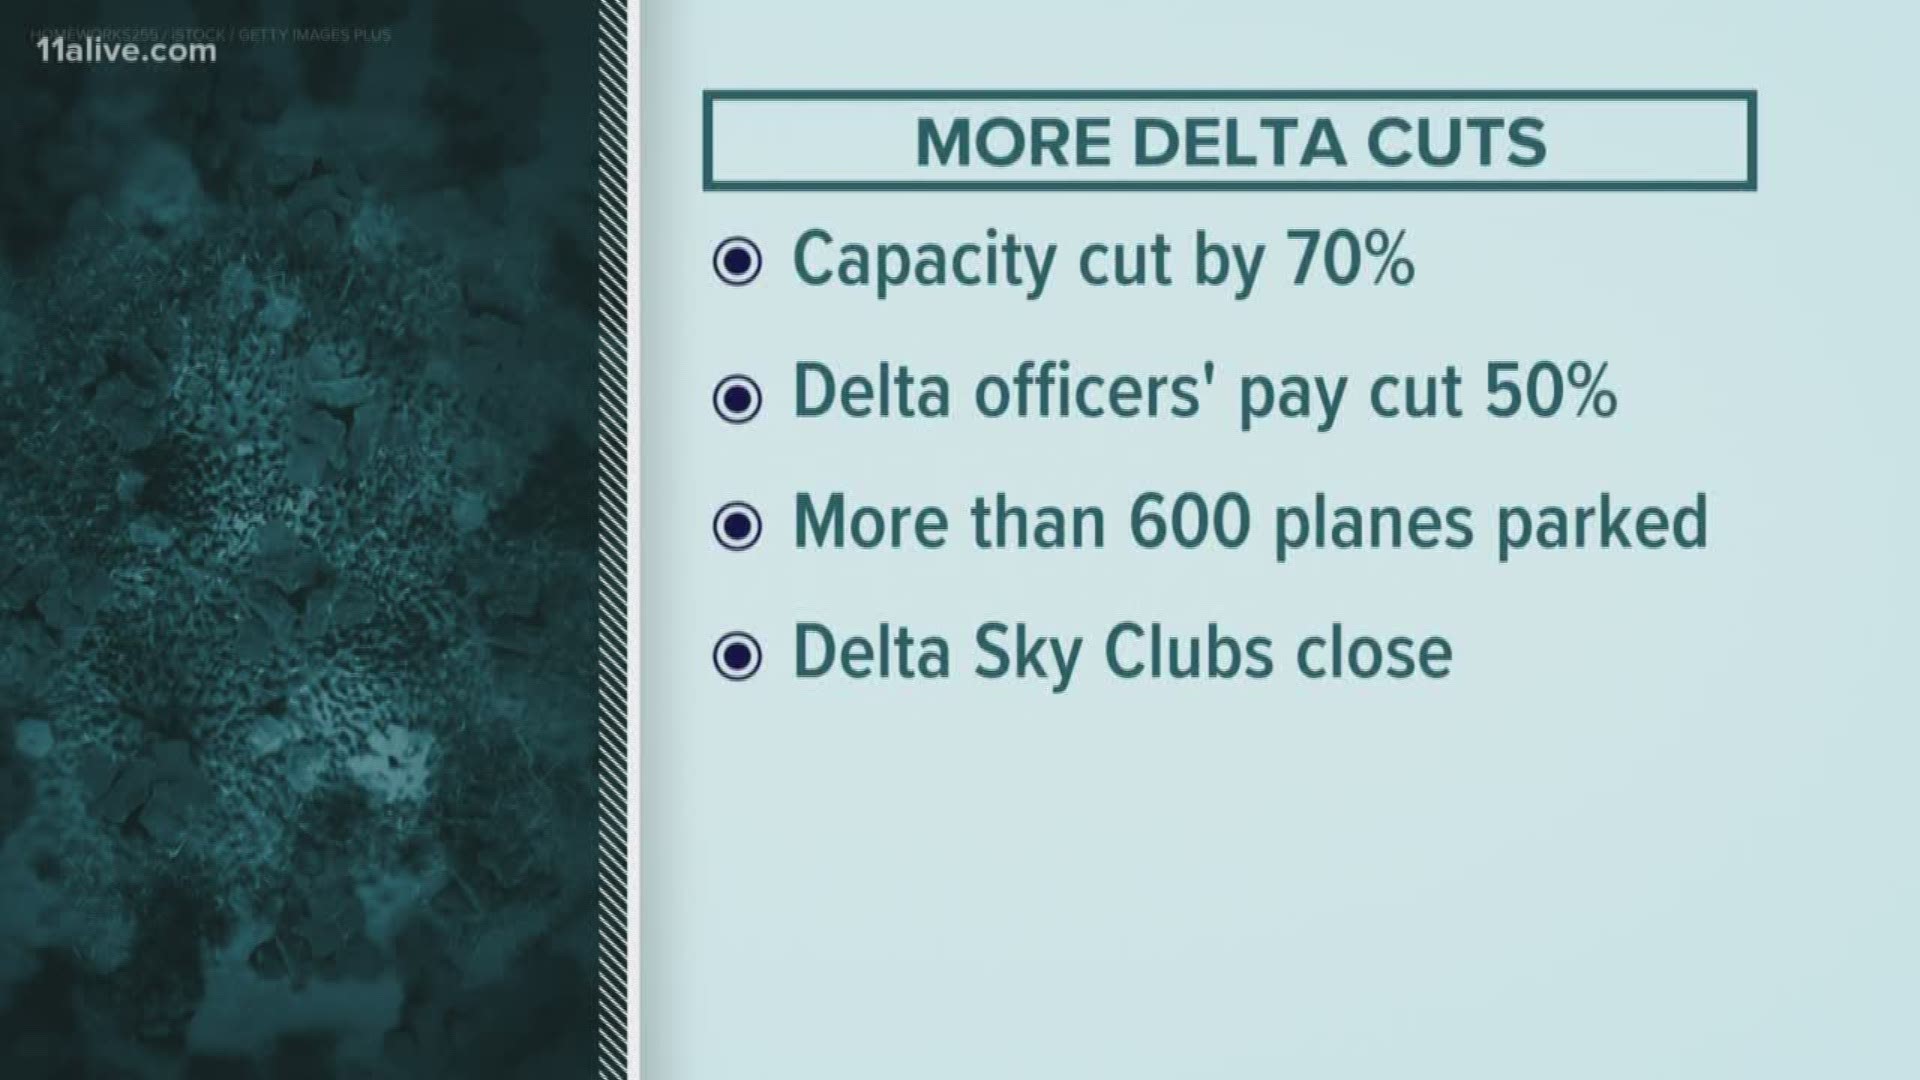 Delta Air Lines has announced sweeping changes due to the coronavirus that will impact thousands of its employees and a majority of its flights.